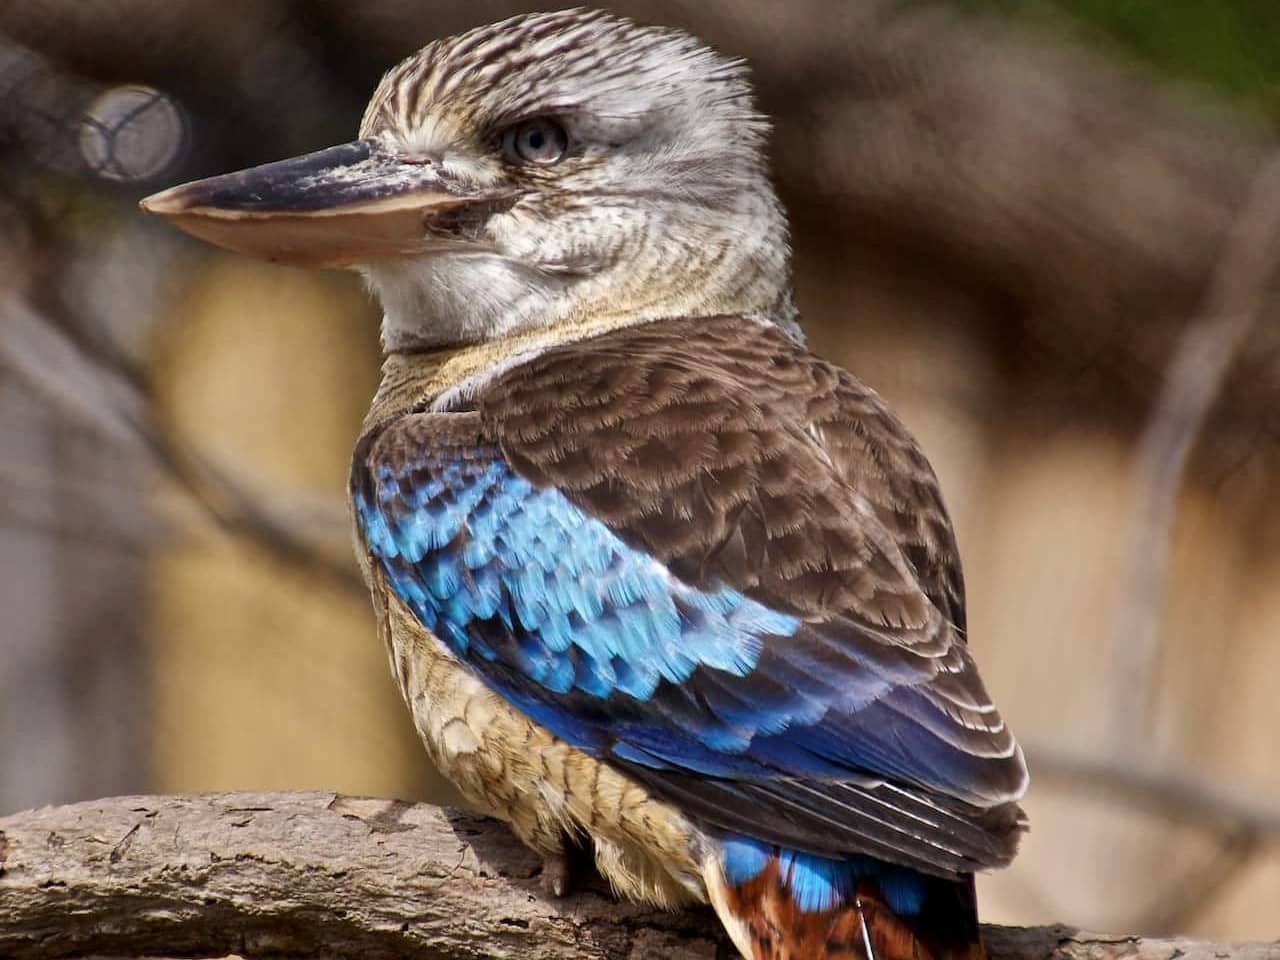 A Blue-winged Kookaburras bird resting under the tree branches.